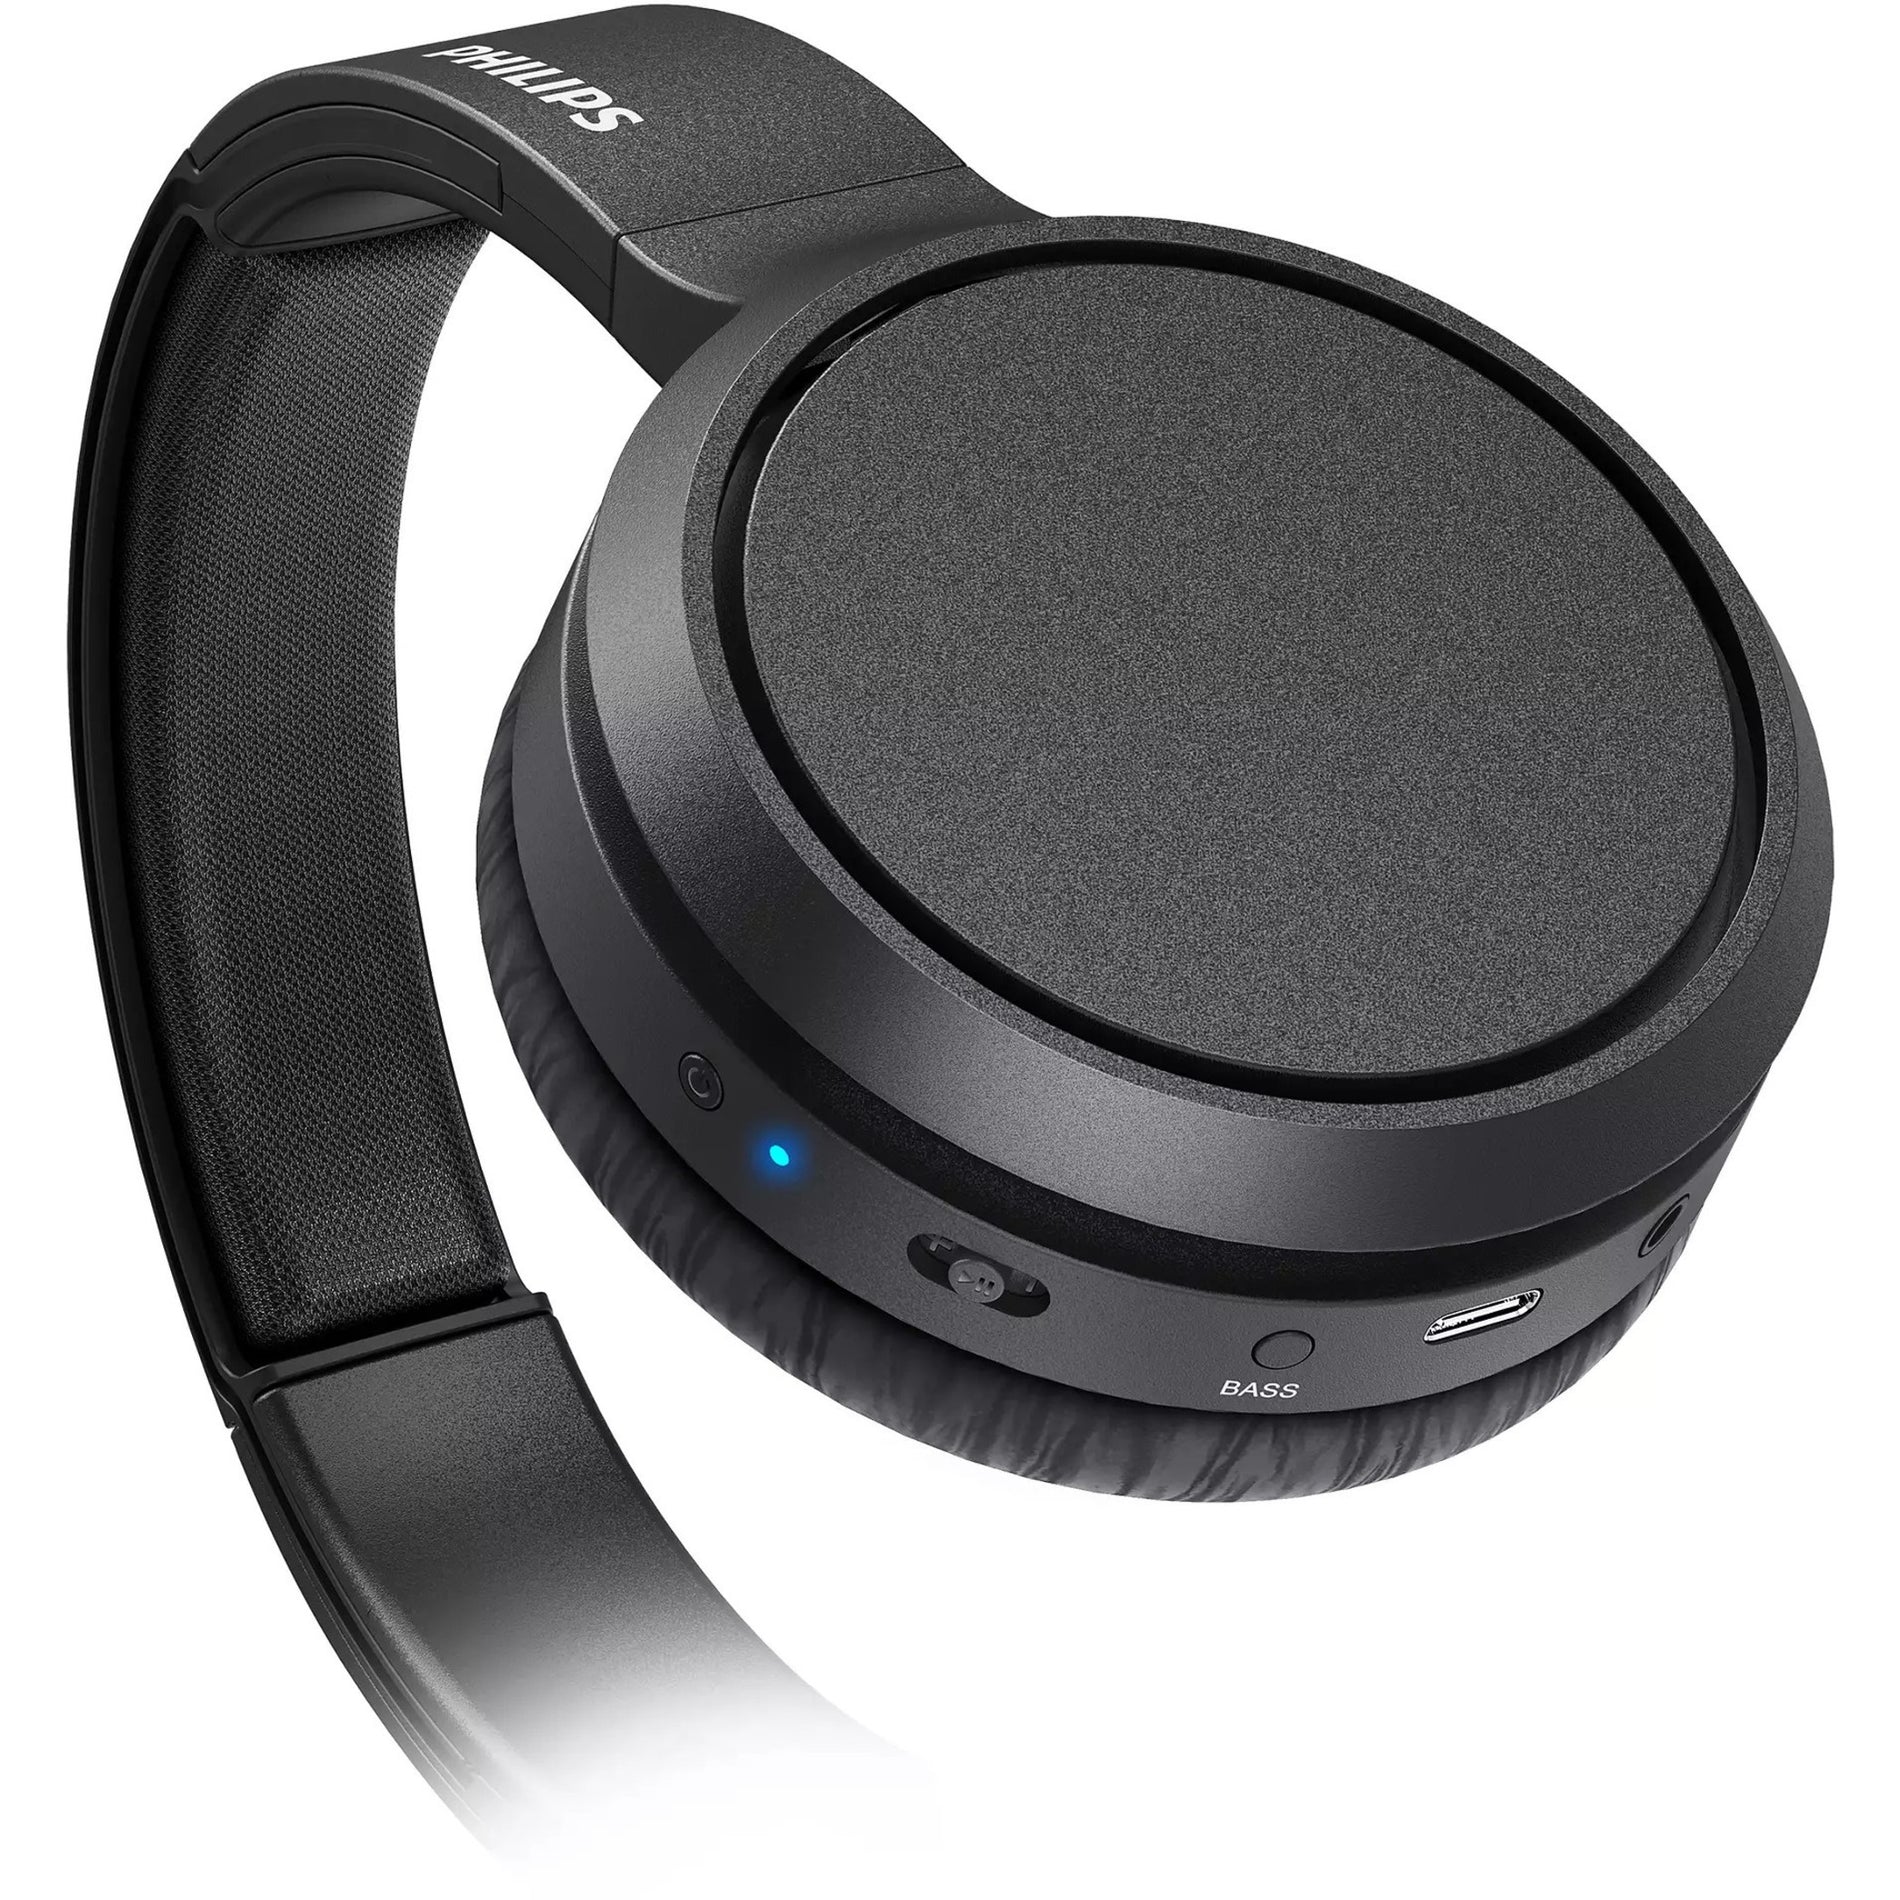 Philips TAH5205BK/00 Headset, Fold-Flat Lightweight Over-the-Ear Headphones with Integrated Microphone